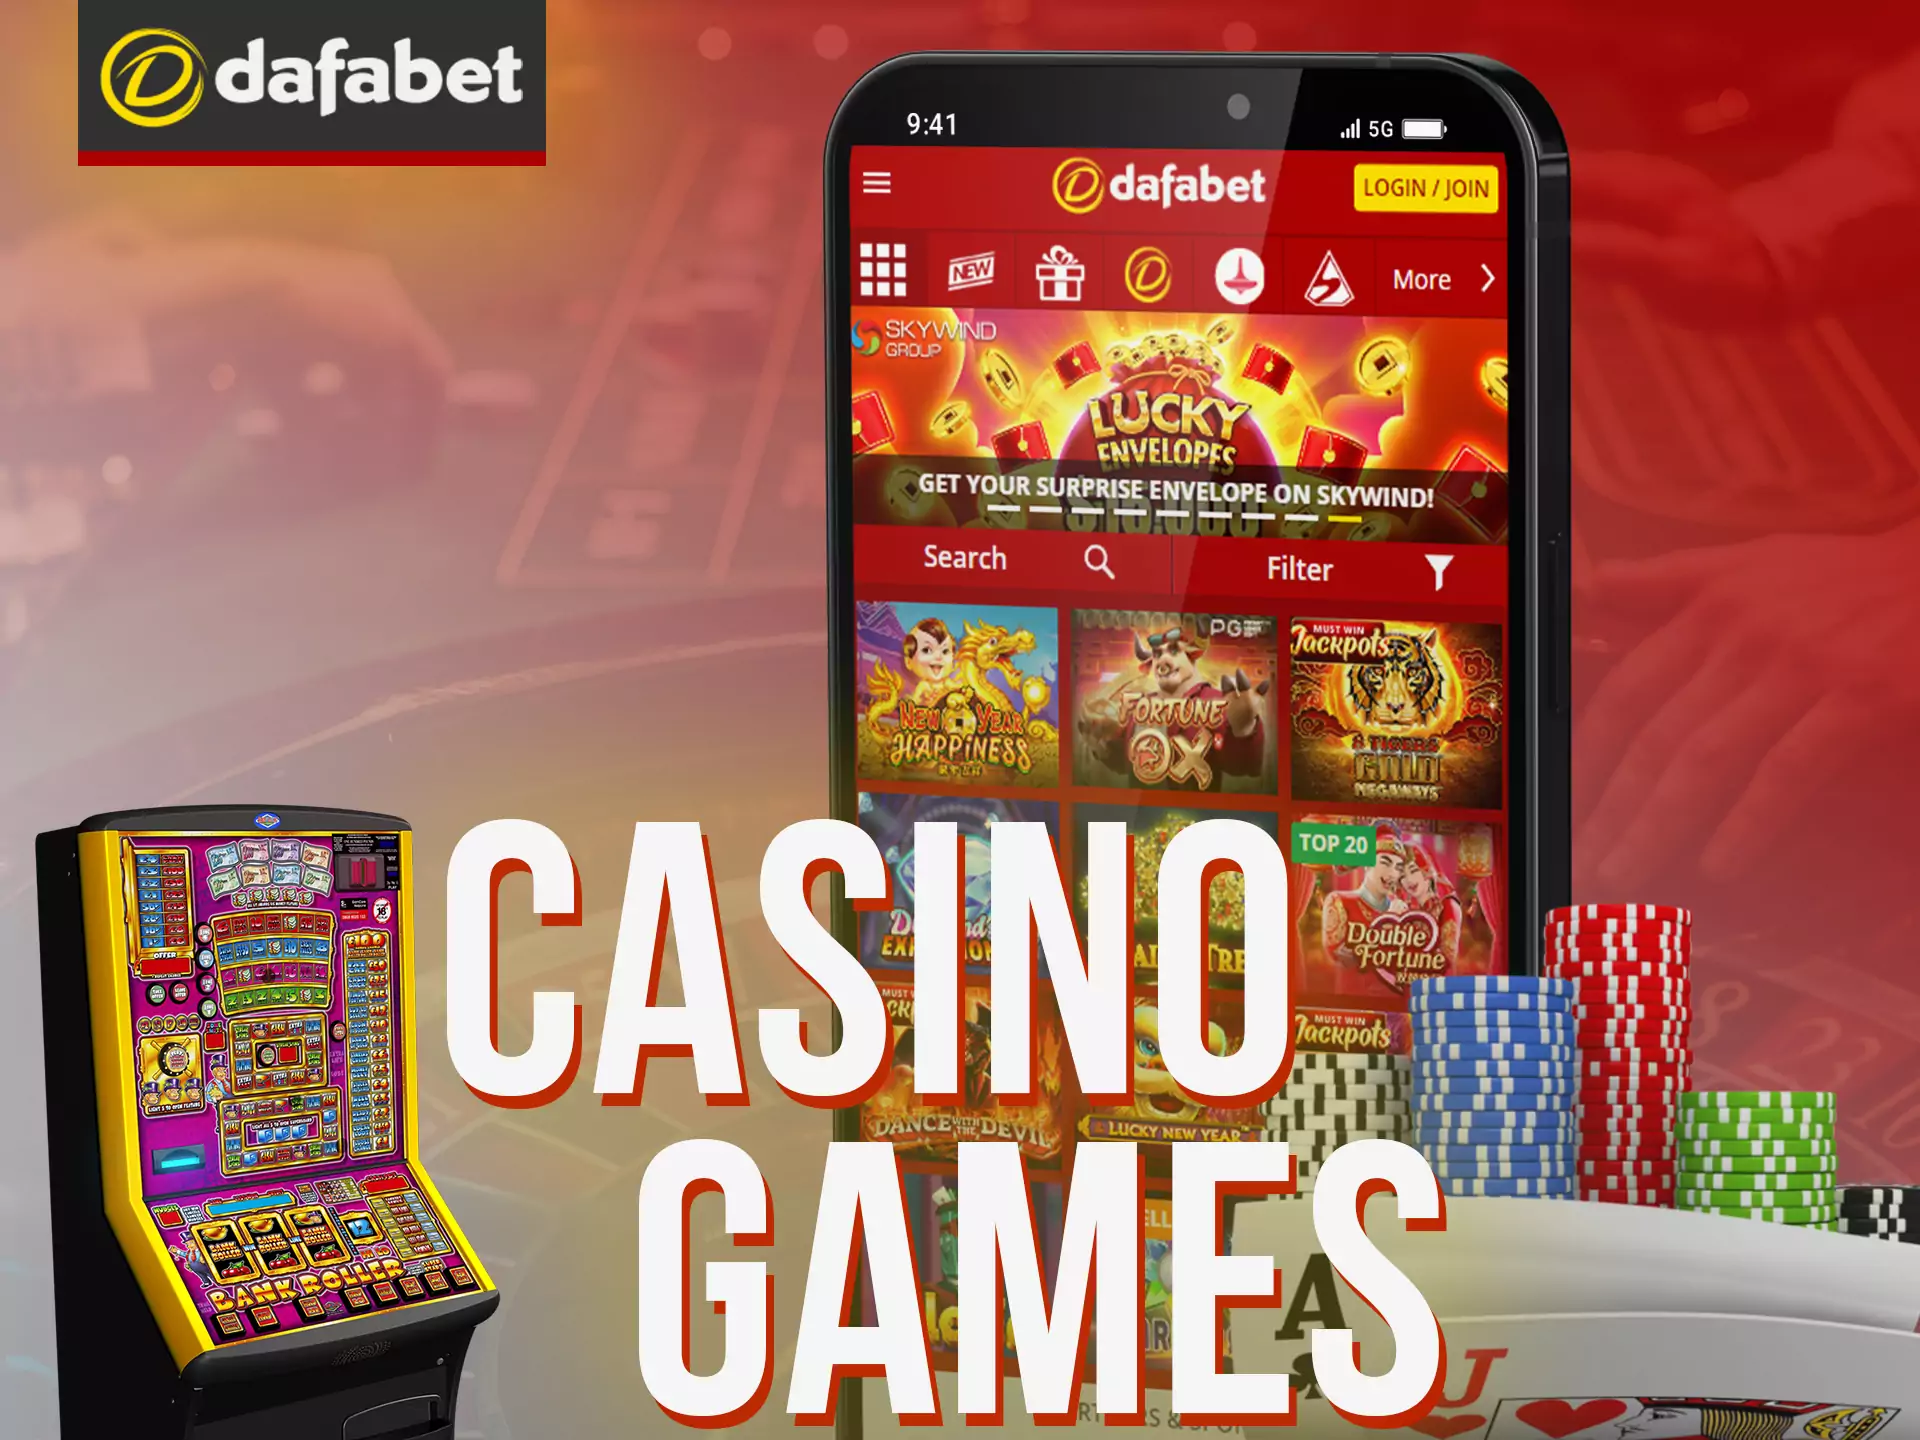 Search for your favourite casino games in Dafabet app.